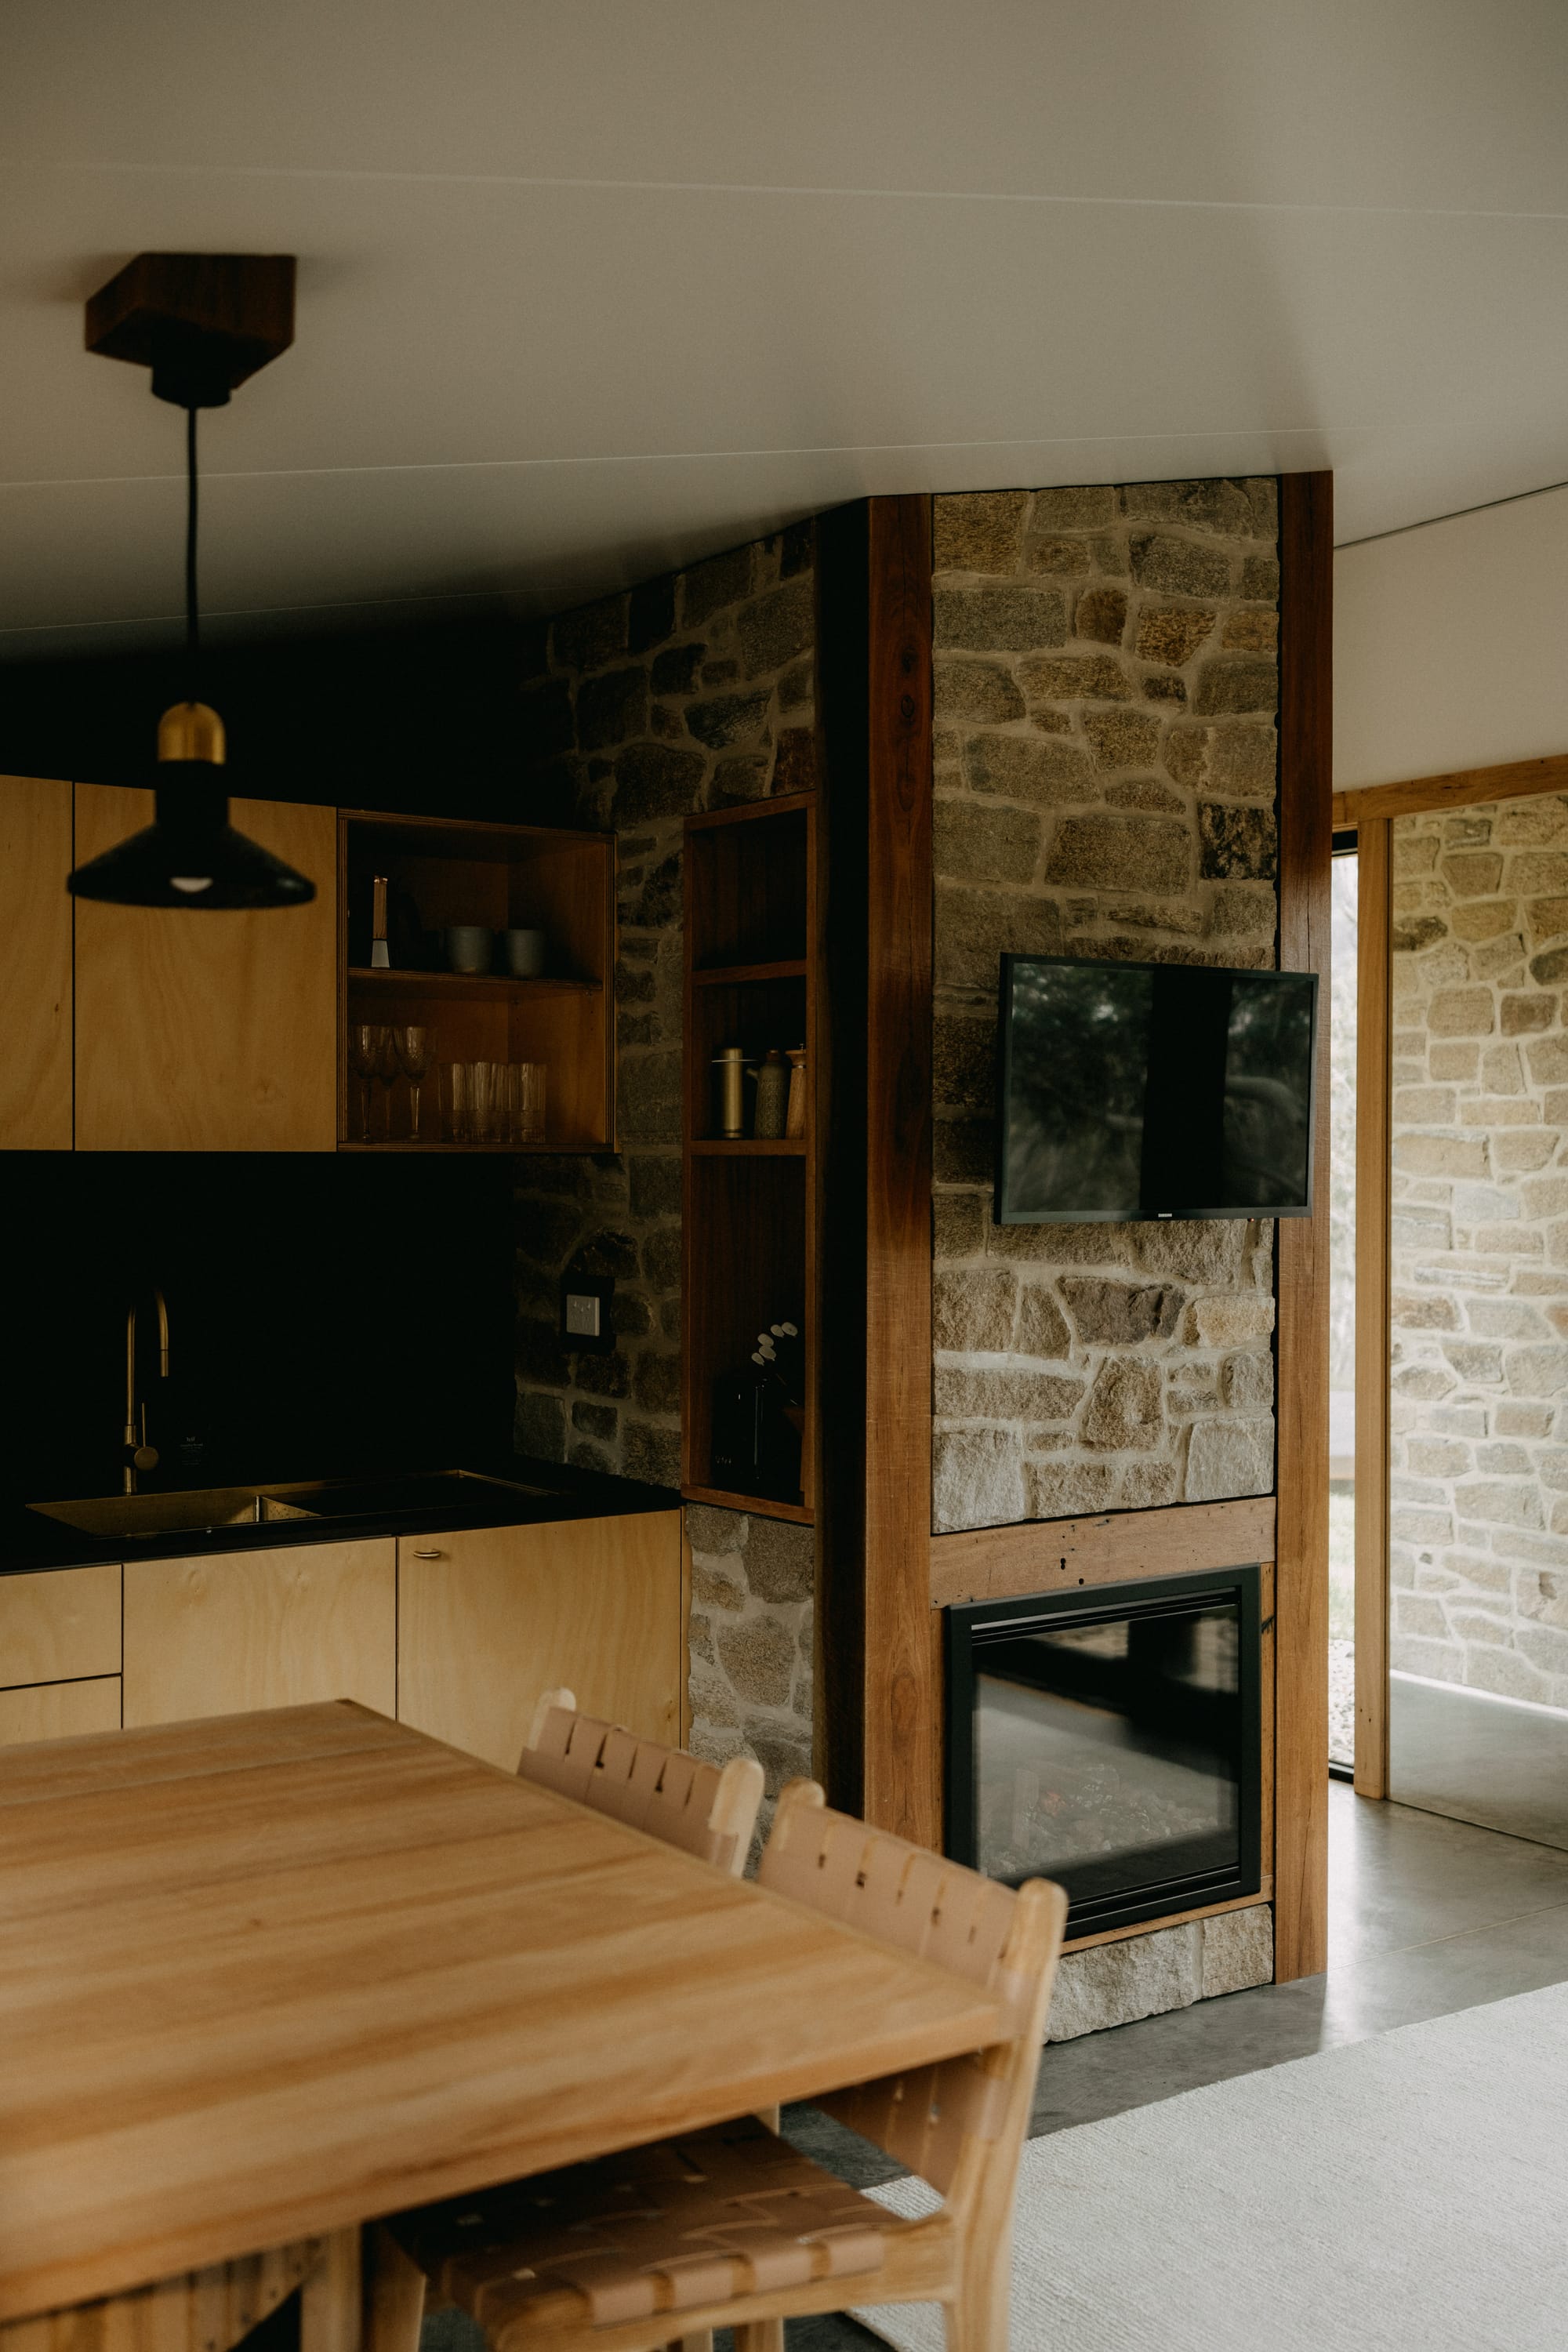 Crafters Eco-Cabins. Image copyright of Crafters. Stone walls in interior kitchen, with raw plywood veneer cabinetry and black splashback.